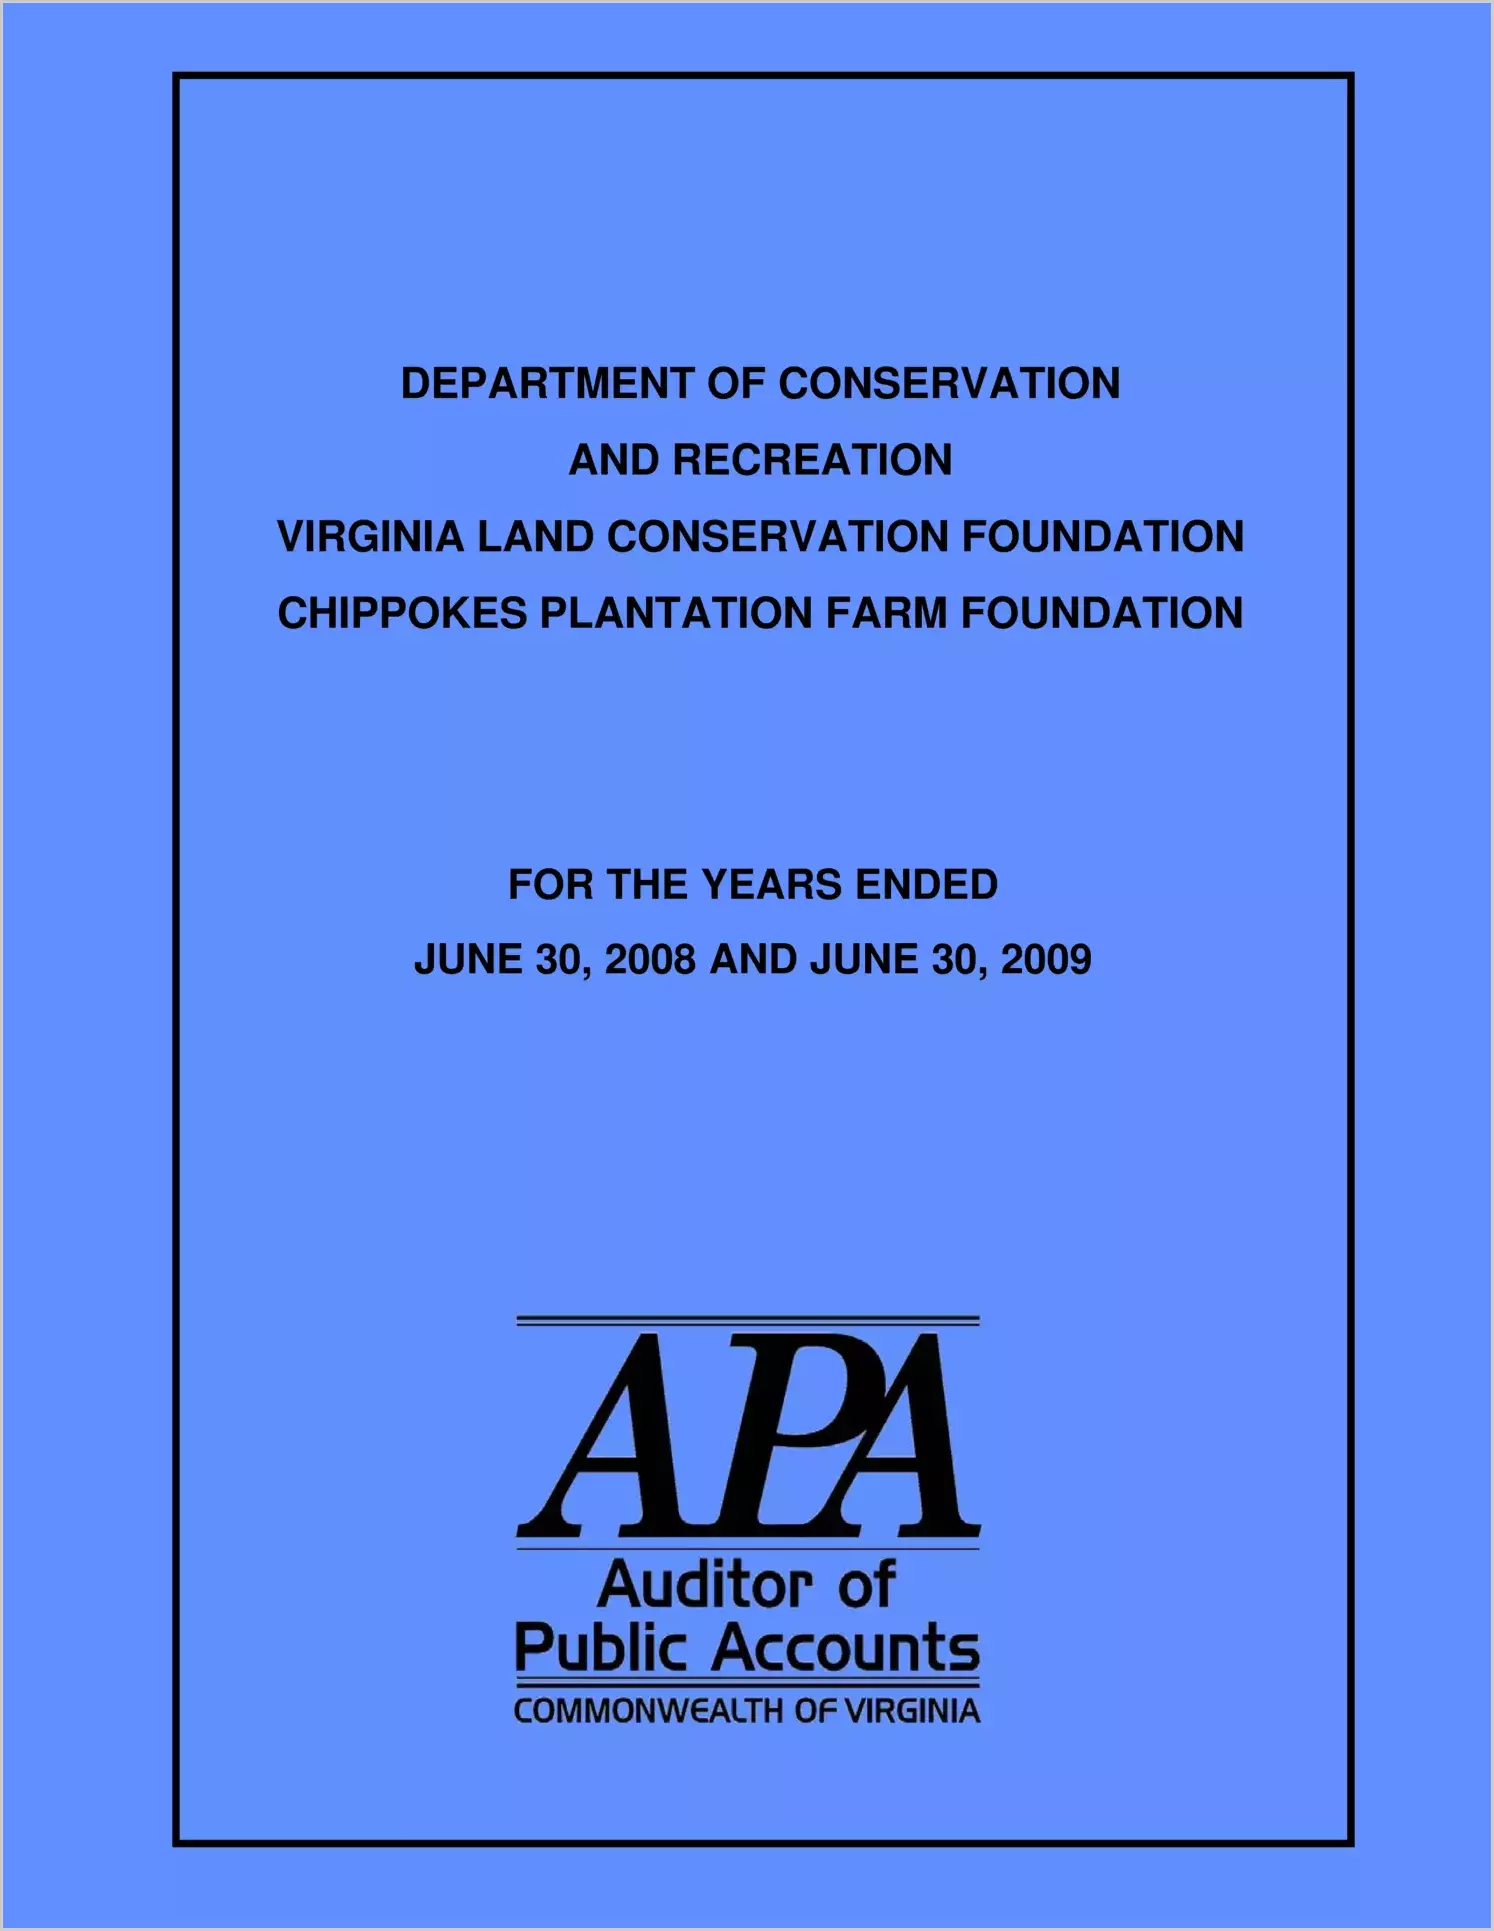 Department of Conservation and Recreation Report on Audit for the Years Ended June 30, 2008 and June 30, 2009